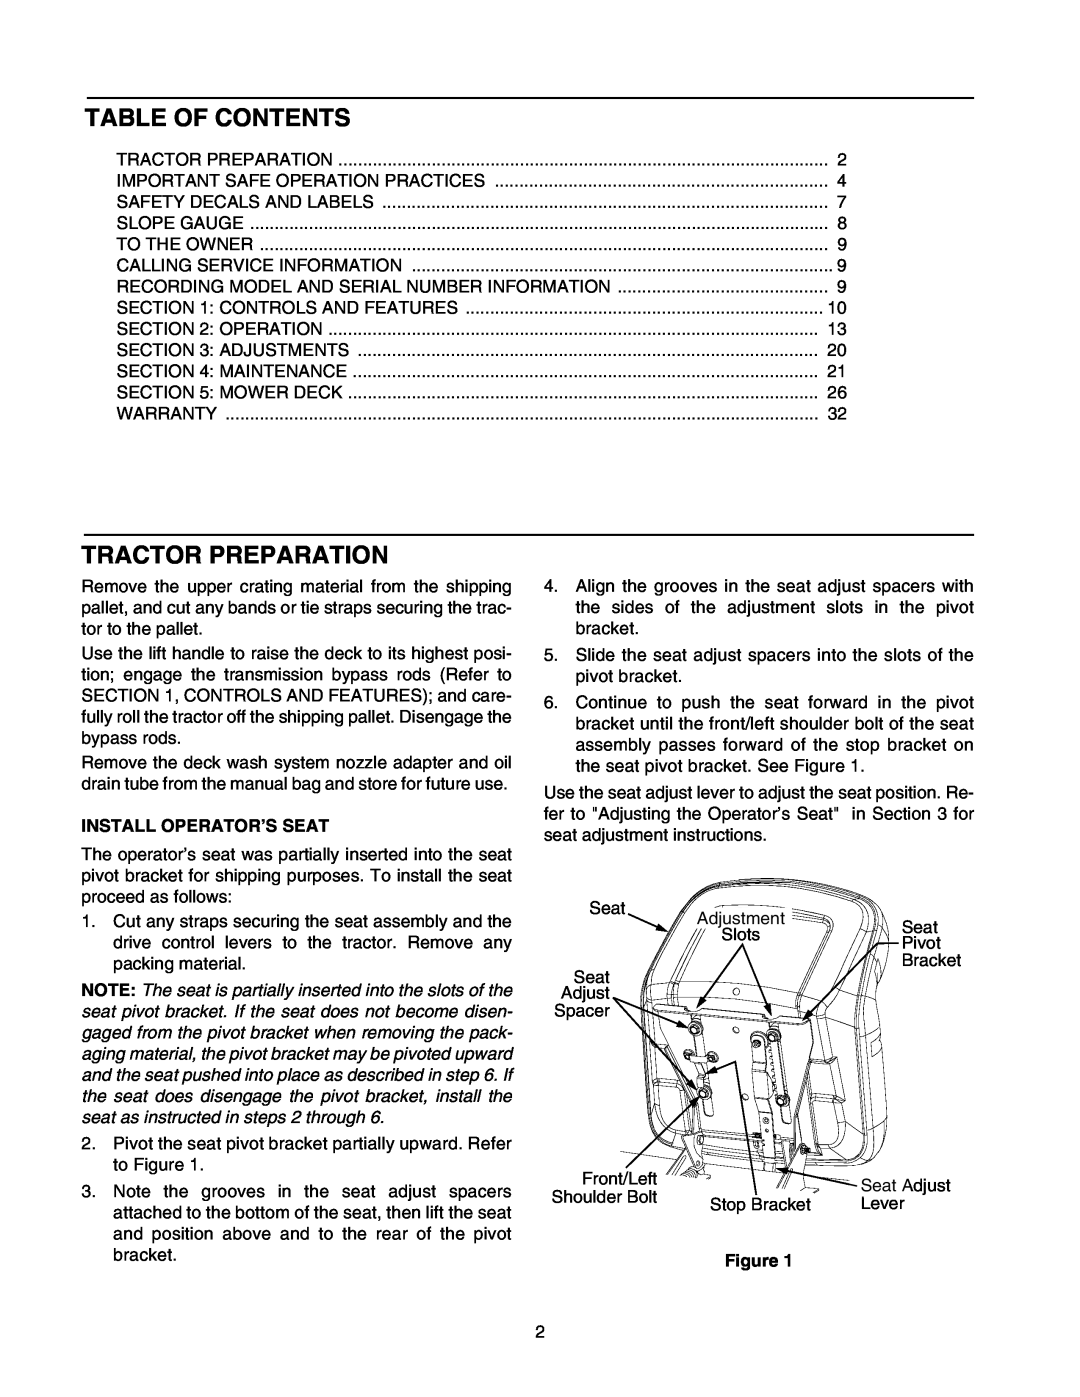 Cub Cadet RZT 50 manual Table Of Contents, Tractor Preparation, Install Operator’S Seat 